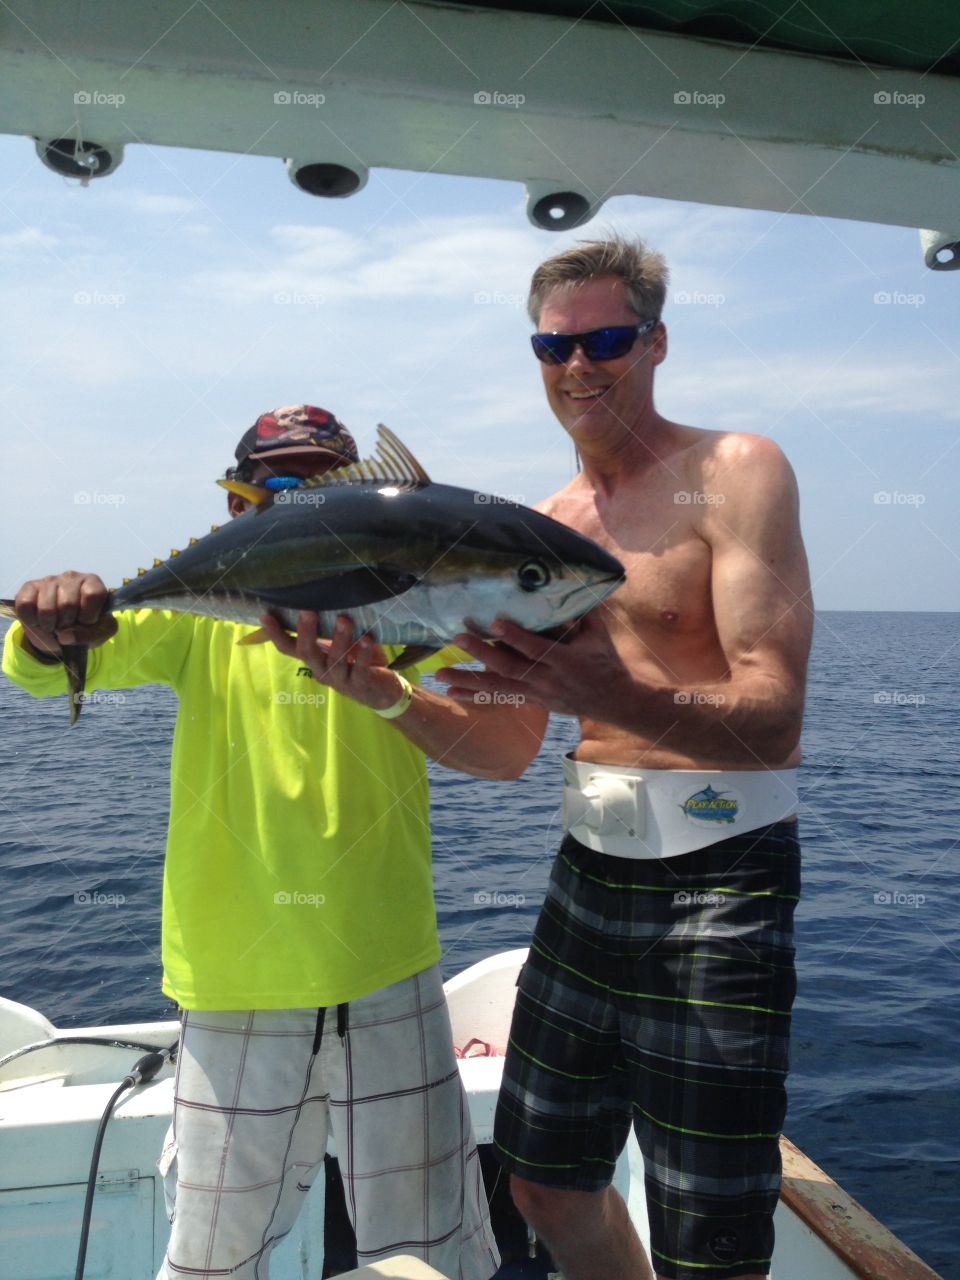 Blackfin Tuna . My dad caught it in Costa Rica, then stepped on the hook a few seconds after the pictures